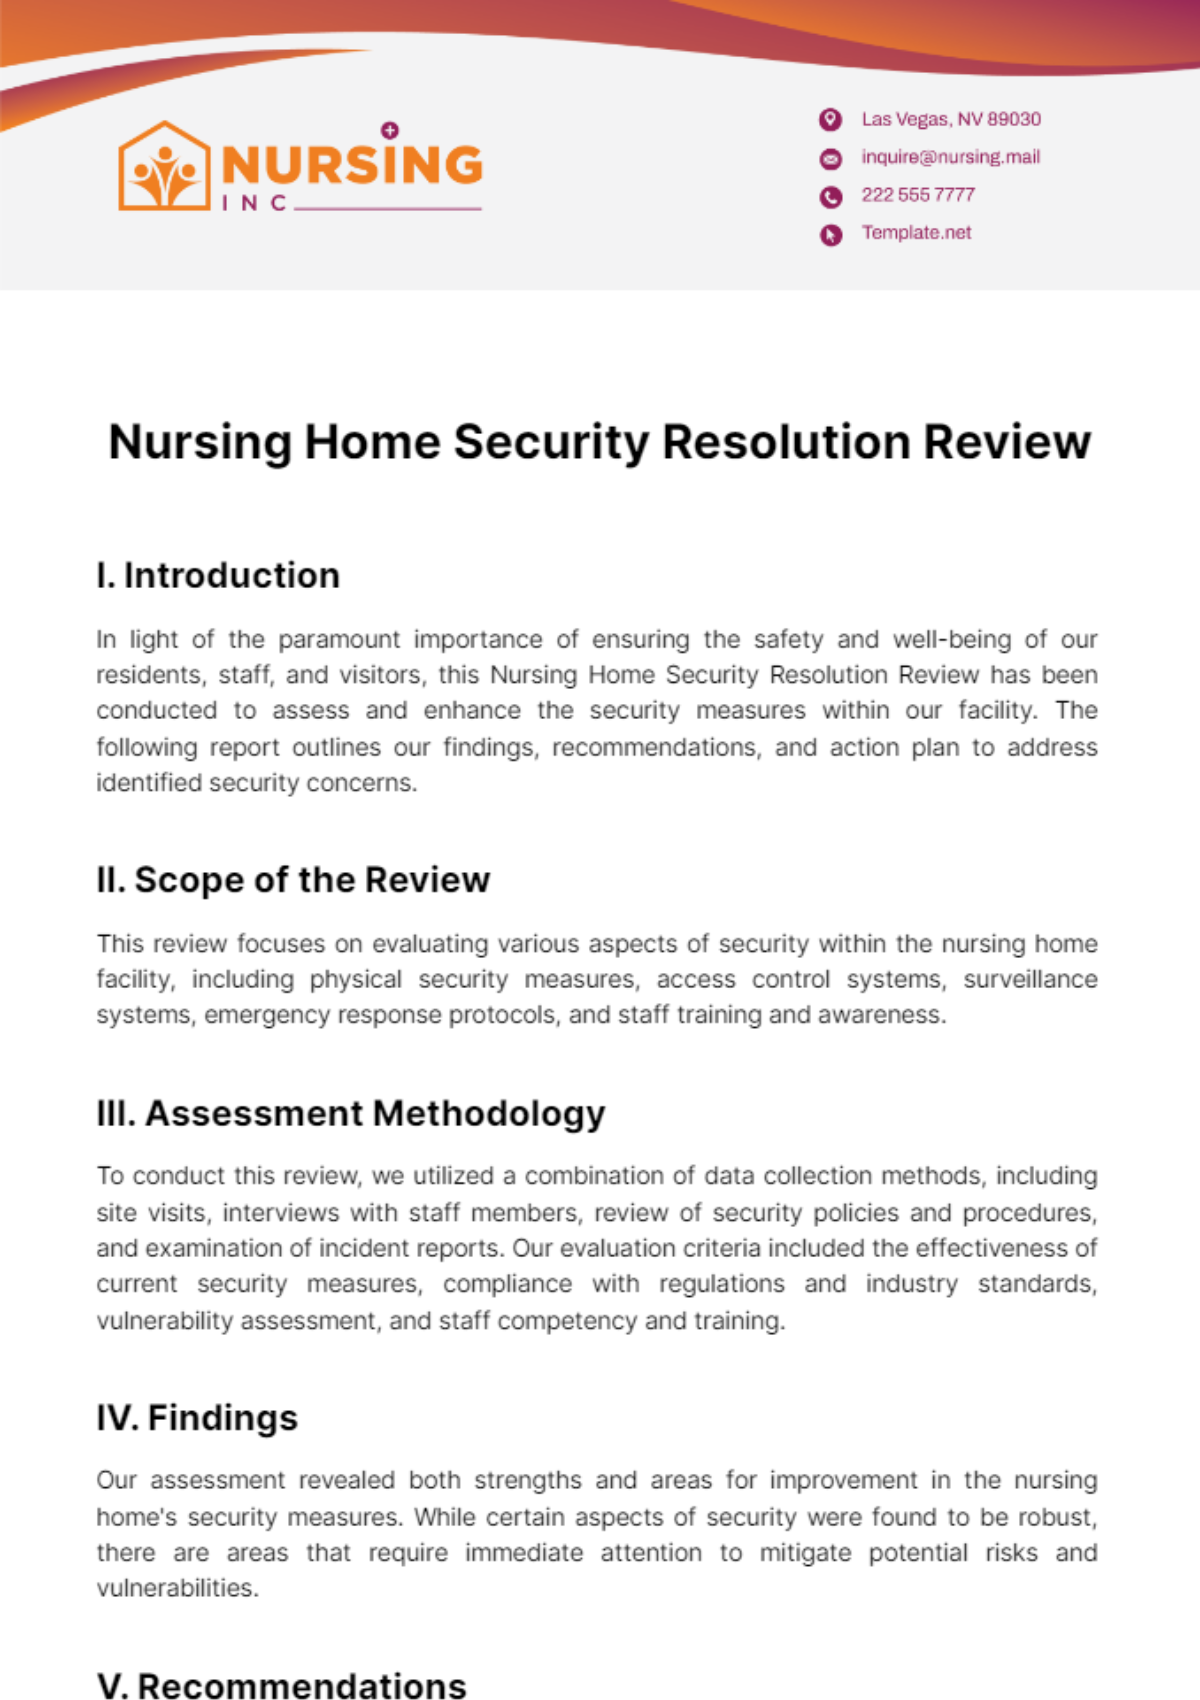 Nursing Home Security Resolution Review Template